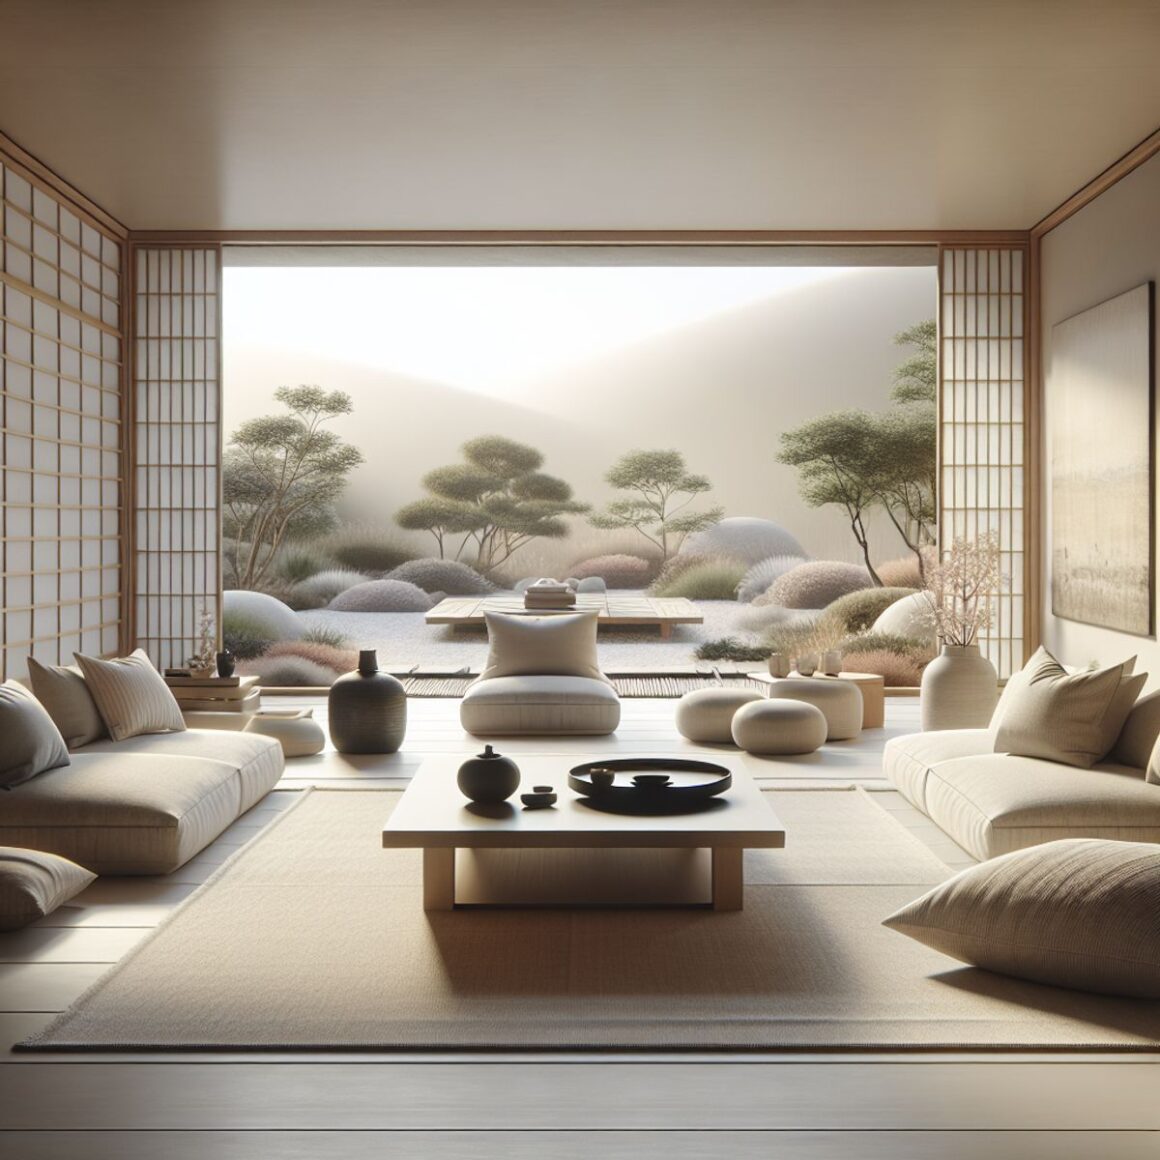 A tranquil, minimalist living room embodying the philosophy of Japandi design.